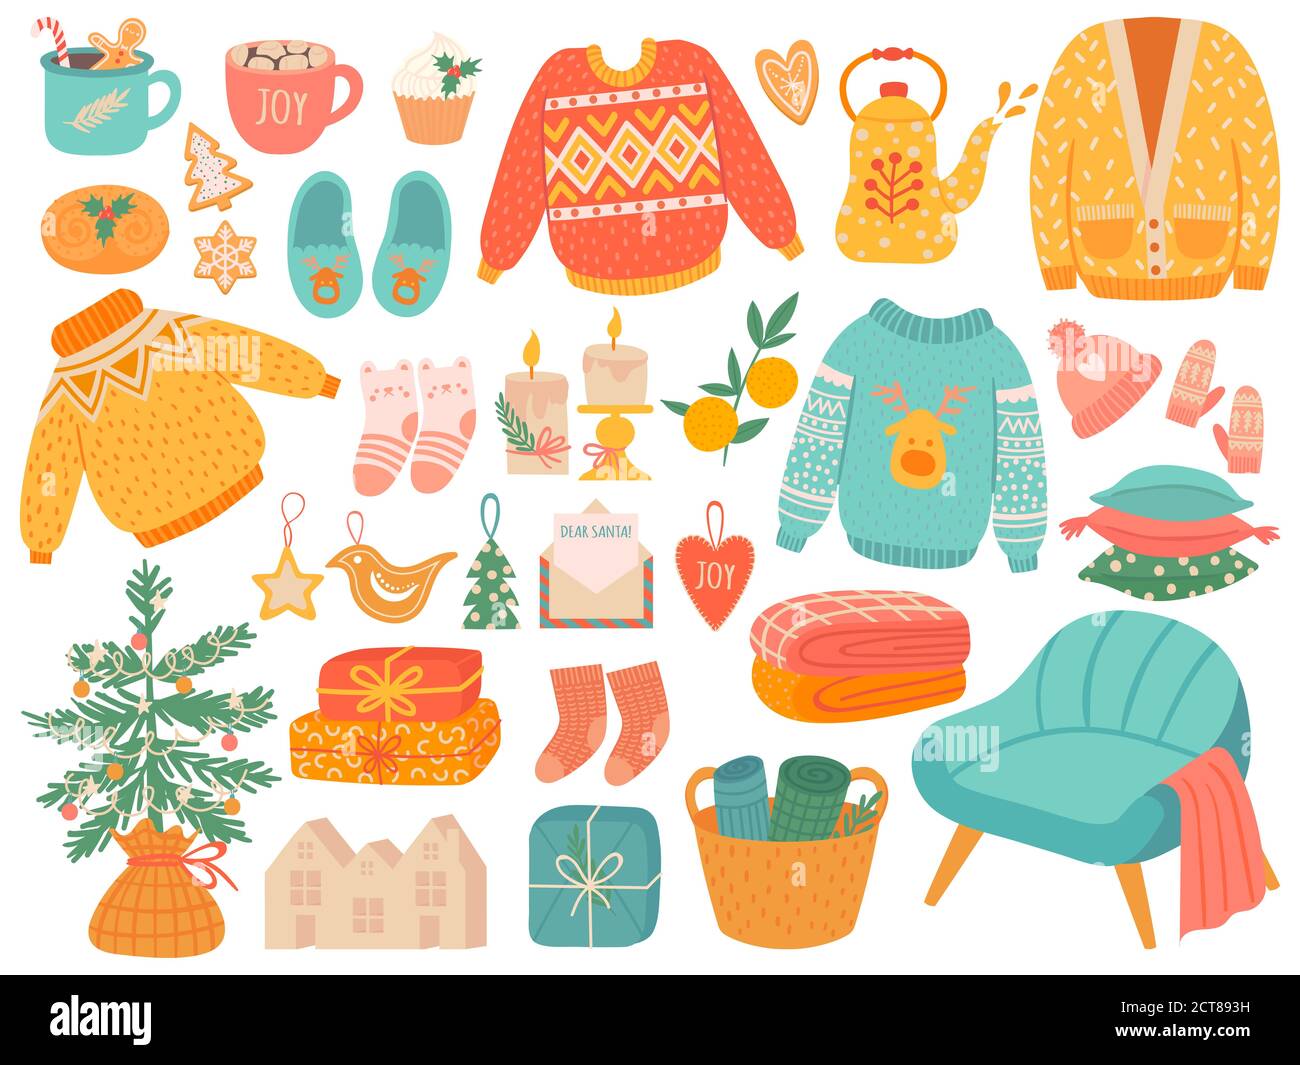 Hygge christmas. Winter knit clothes and holiday decor fir-tree, gifts. Candles, socks and mittens xmas home symbols, cartoon vector set. Christmas hy Stock Vector